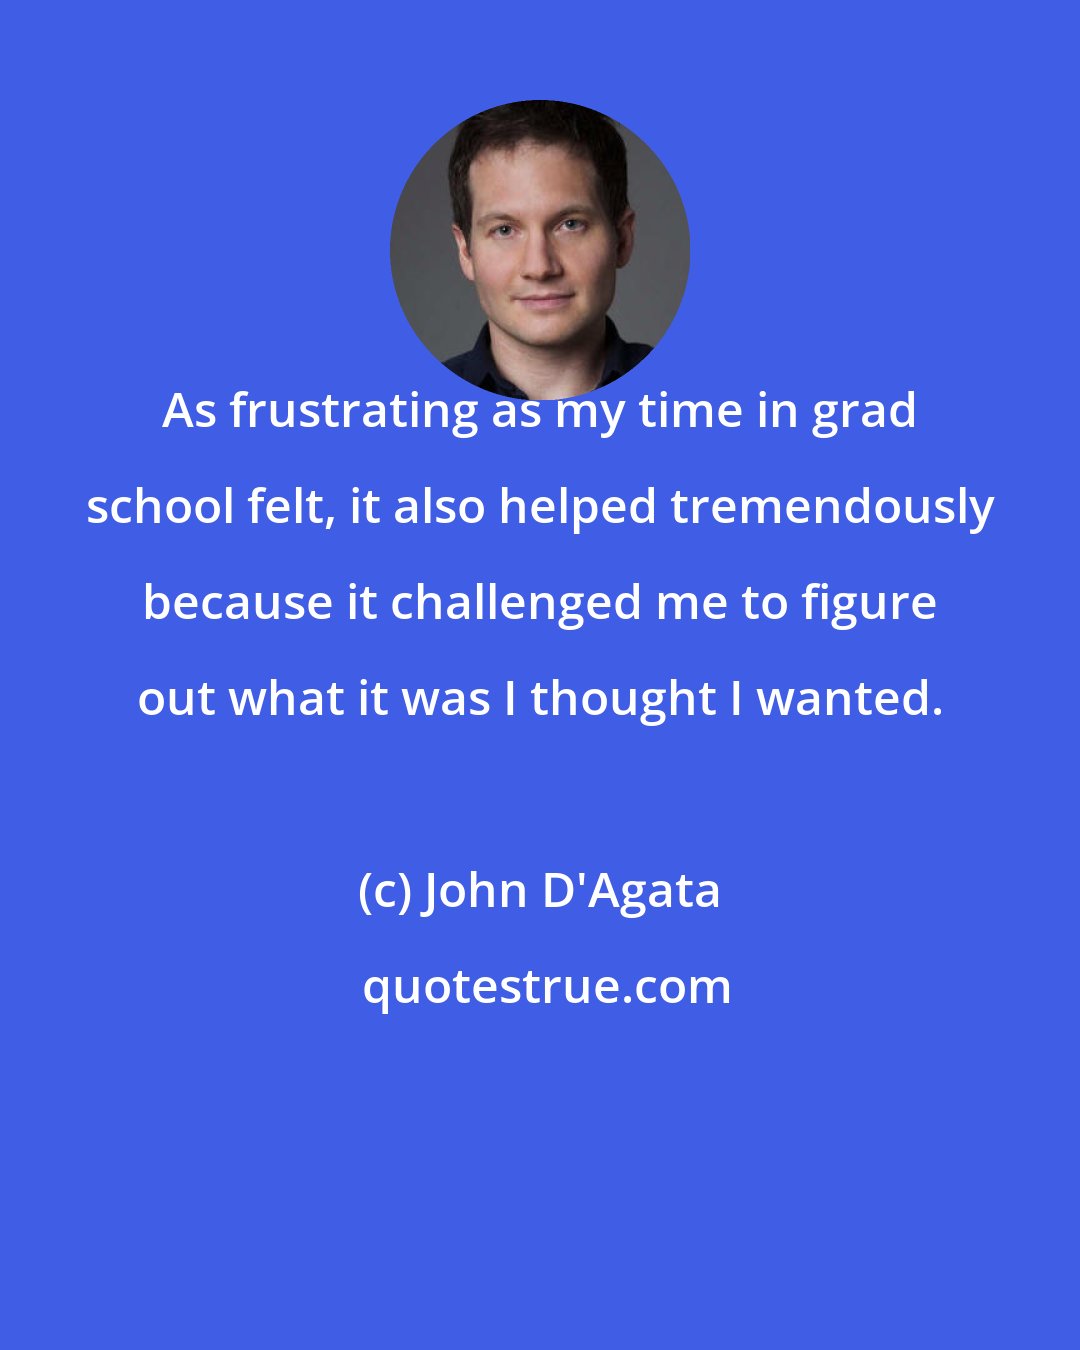 John D'Agata: As frustrating as my time in grad school felt, it also helped tremendously because it challenged me to figure out what it was I thought I wanted.